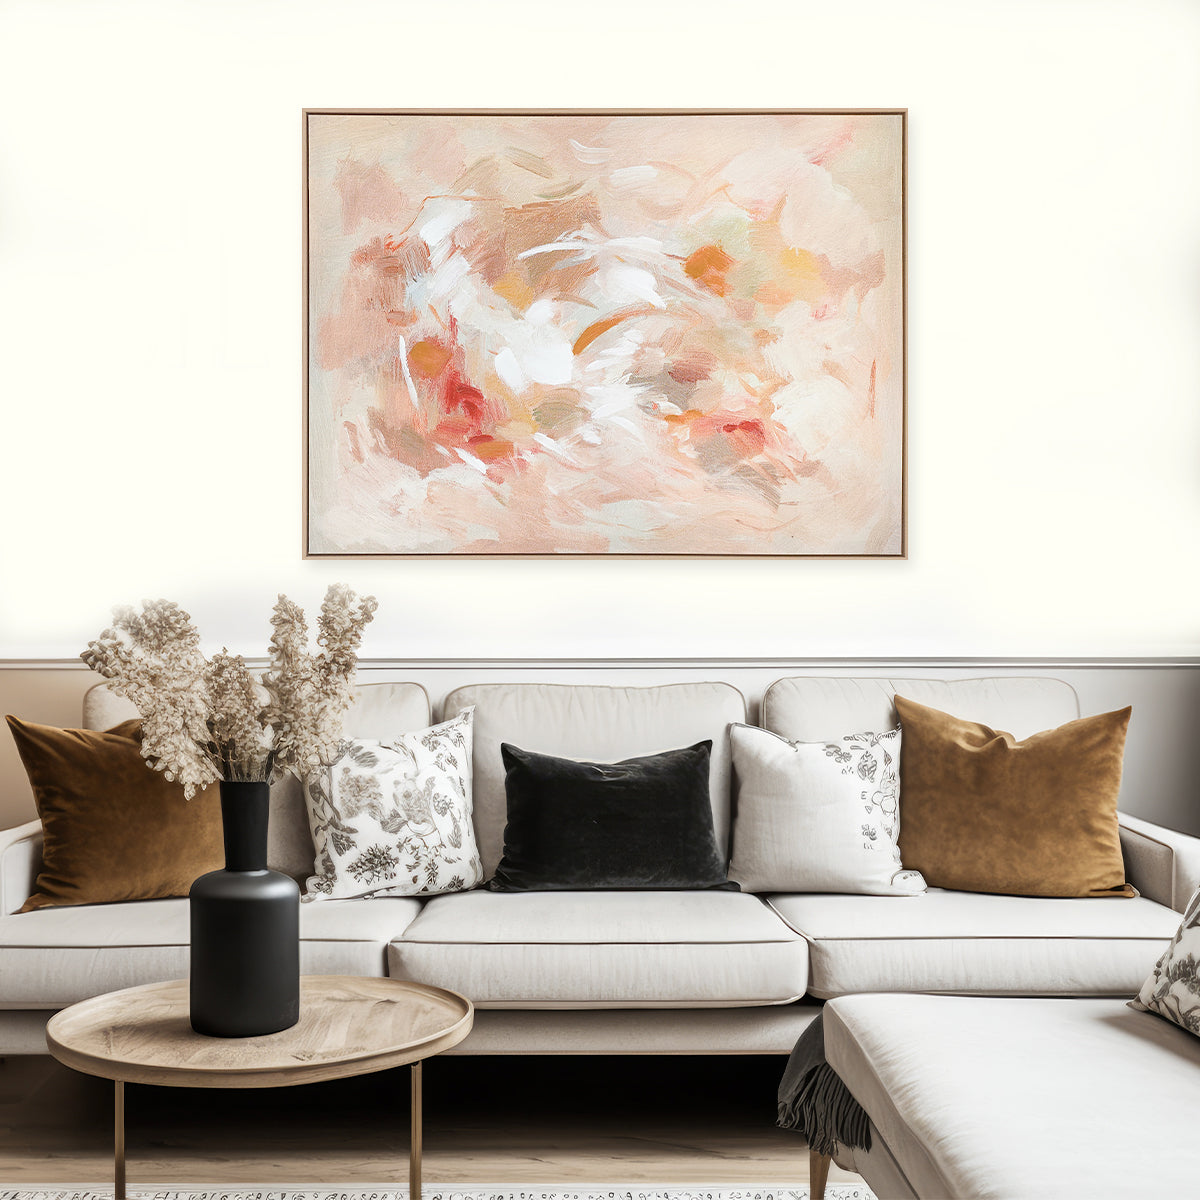 Pink abstract textured wall art affordable oil painting framed in living room landscape